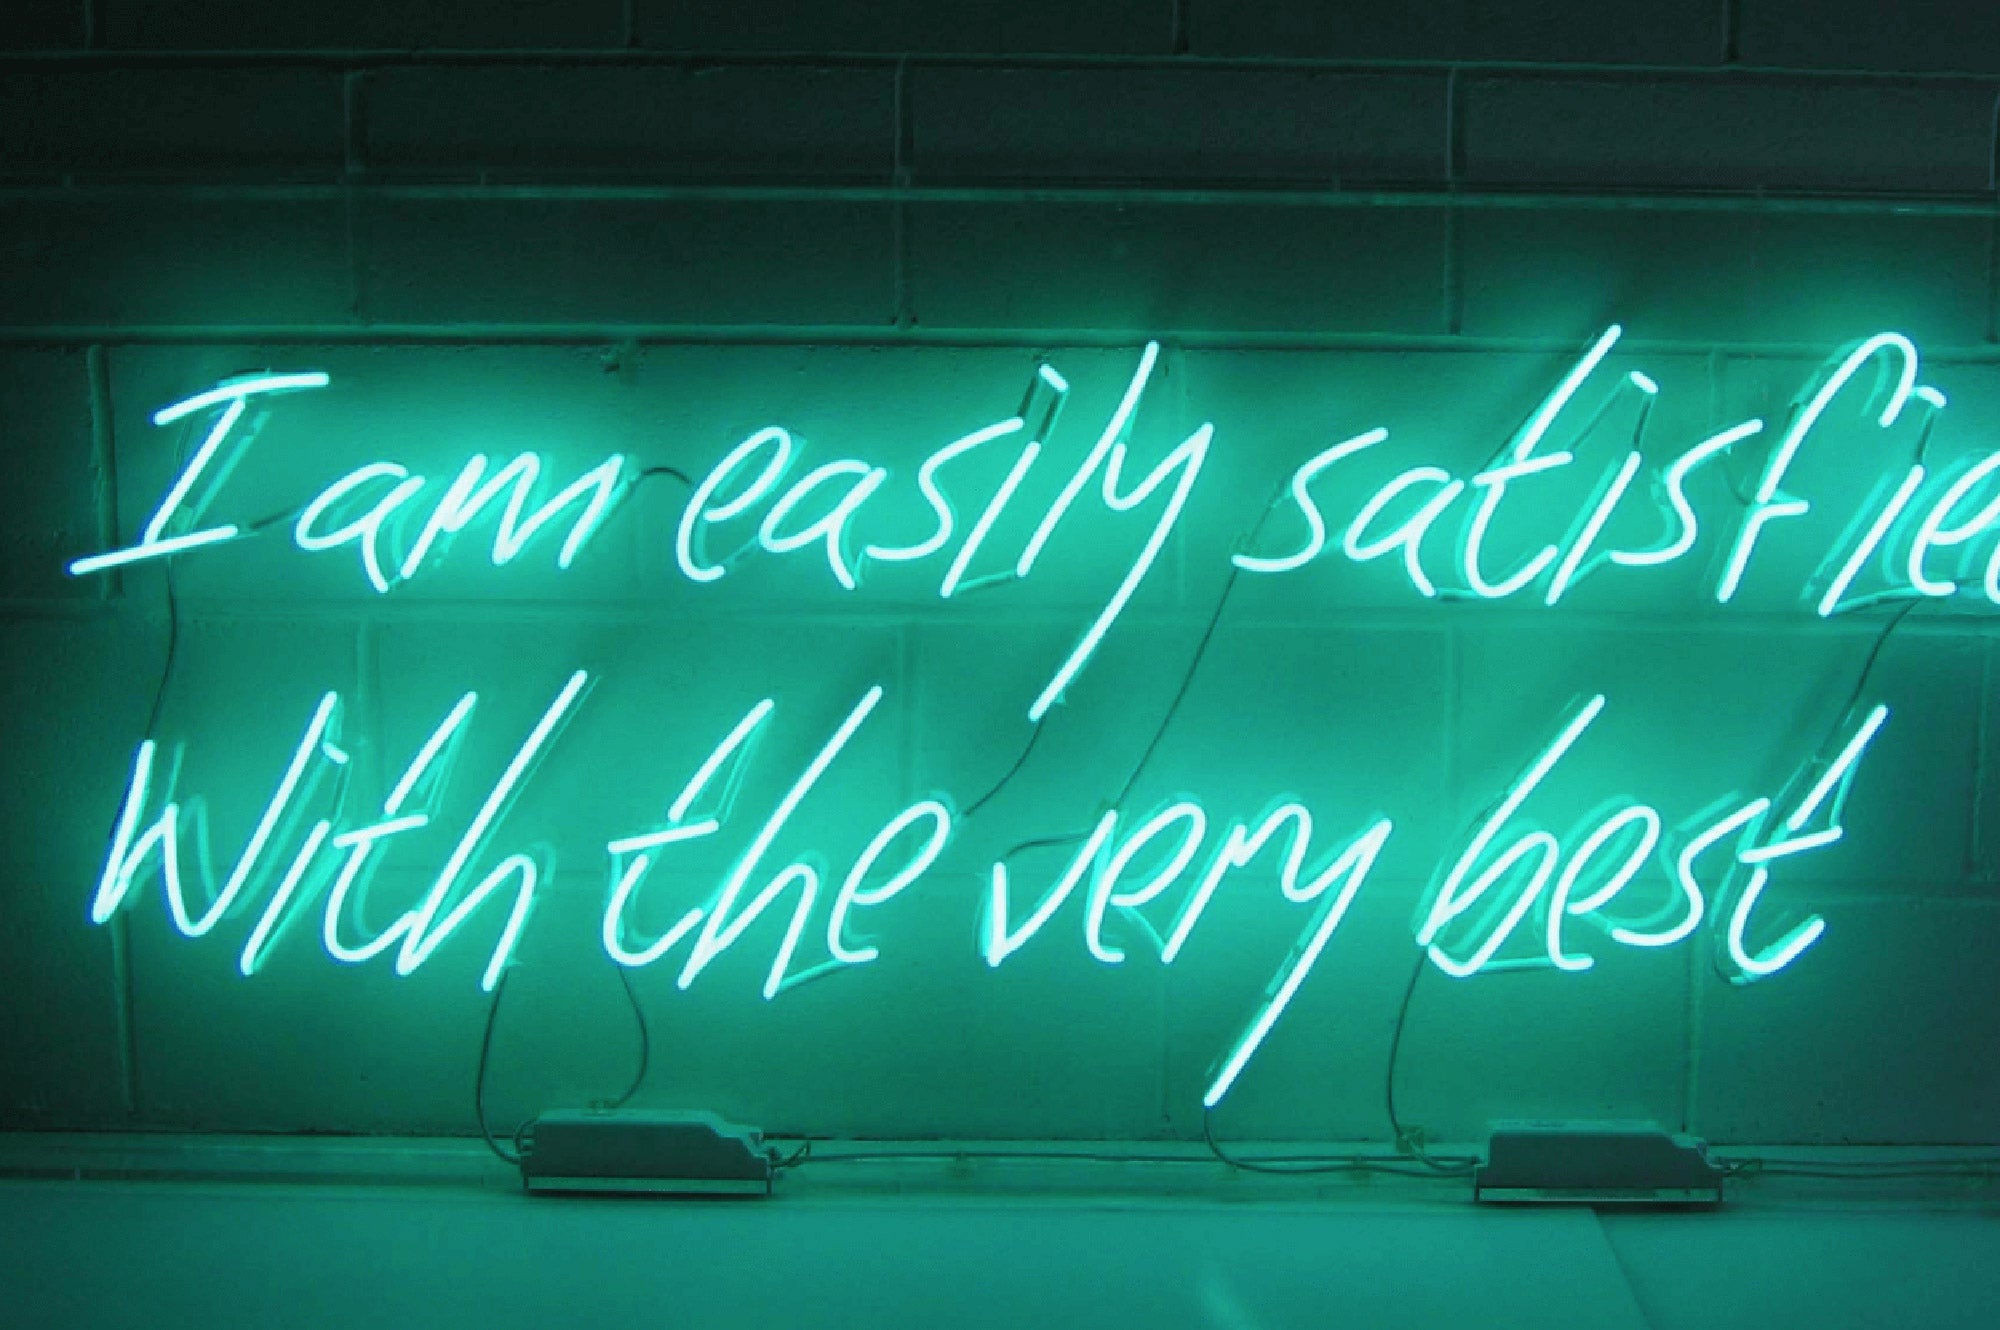 A History of Using Neon in Art